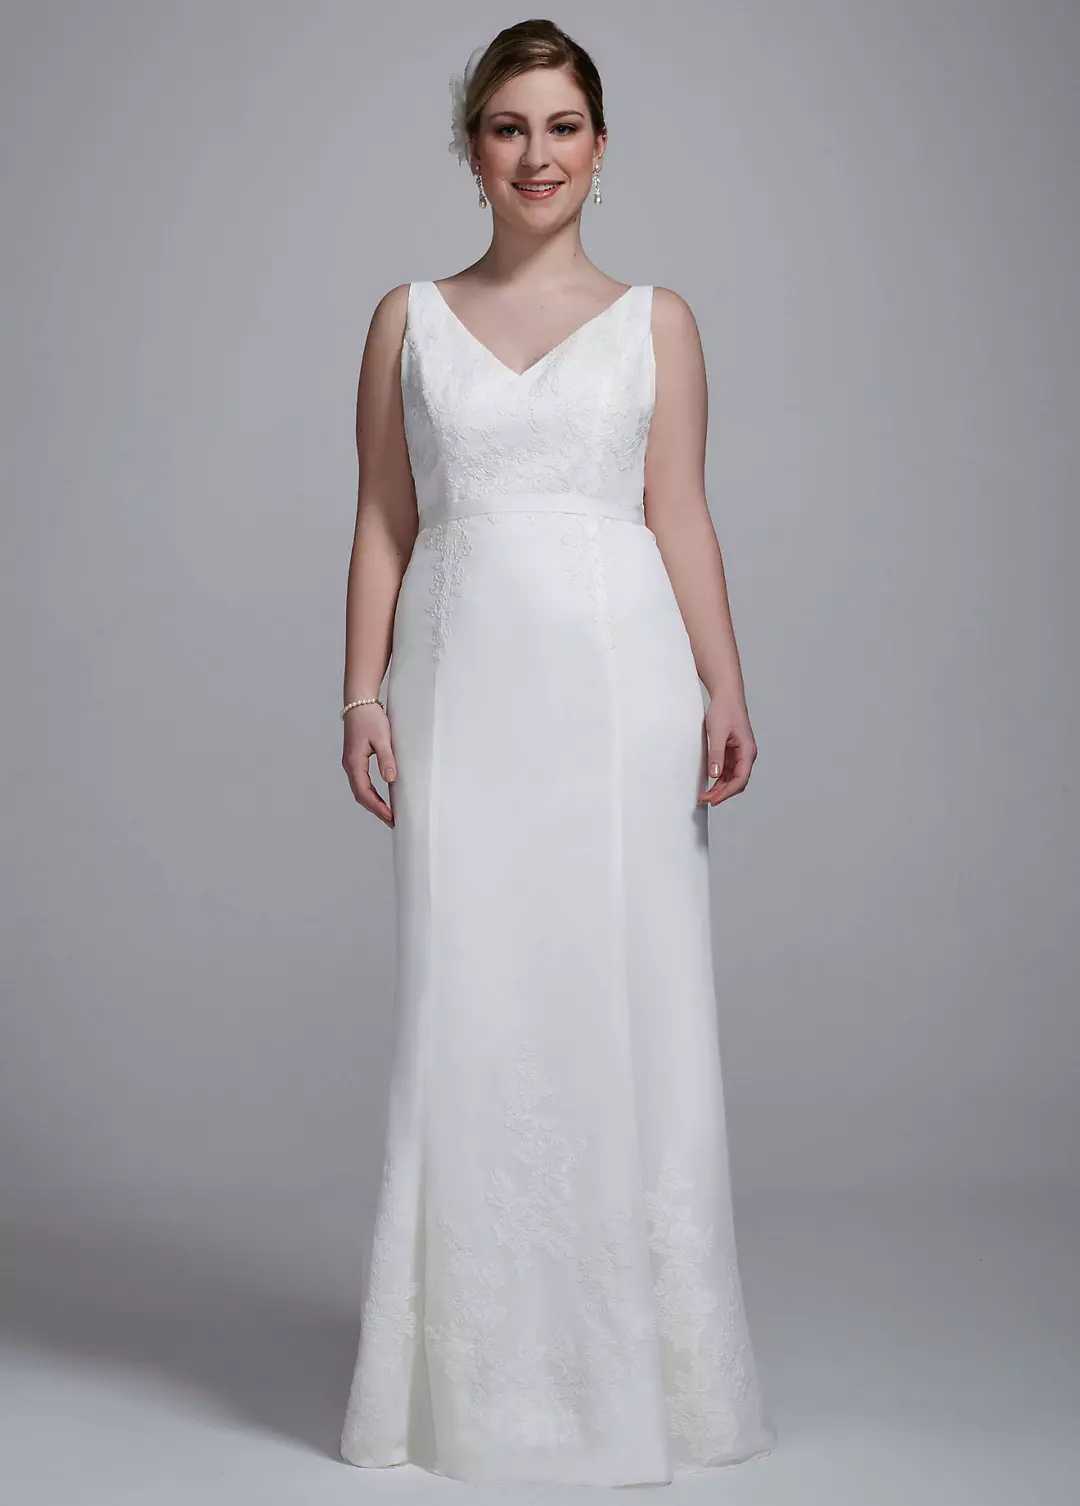 Chiffon Wedding Gown with Ruffle Detail and Lace Image 1